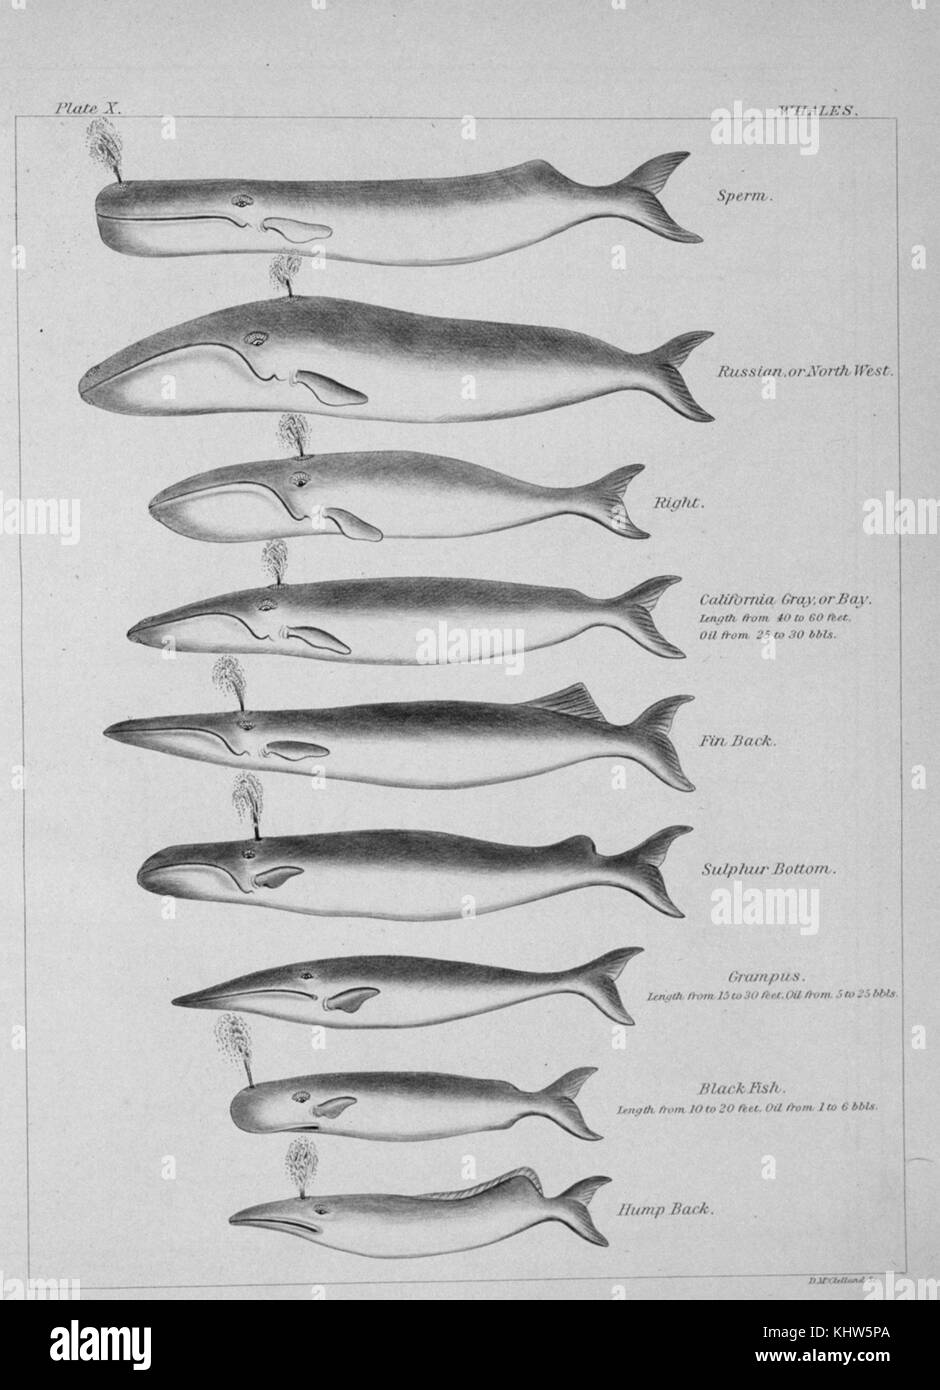 Plate depicting various types of Whales. (Top to bottom) Sperm Whale, Blue Whale (Russian Whale), Right Whales, Gray Whale, Fin Whale, Sulphur Bottom Whale (Blue Whale), Killer Whale (Grampus Whale and Blackfish Whale), Humpback Whale. Dated 19th Century Stock Photo